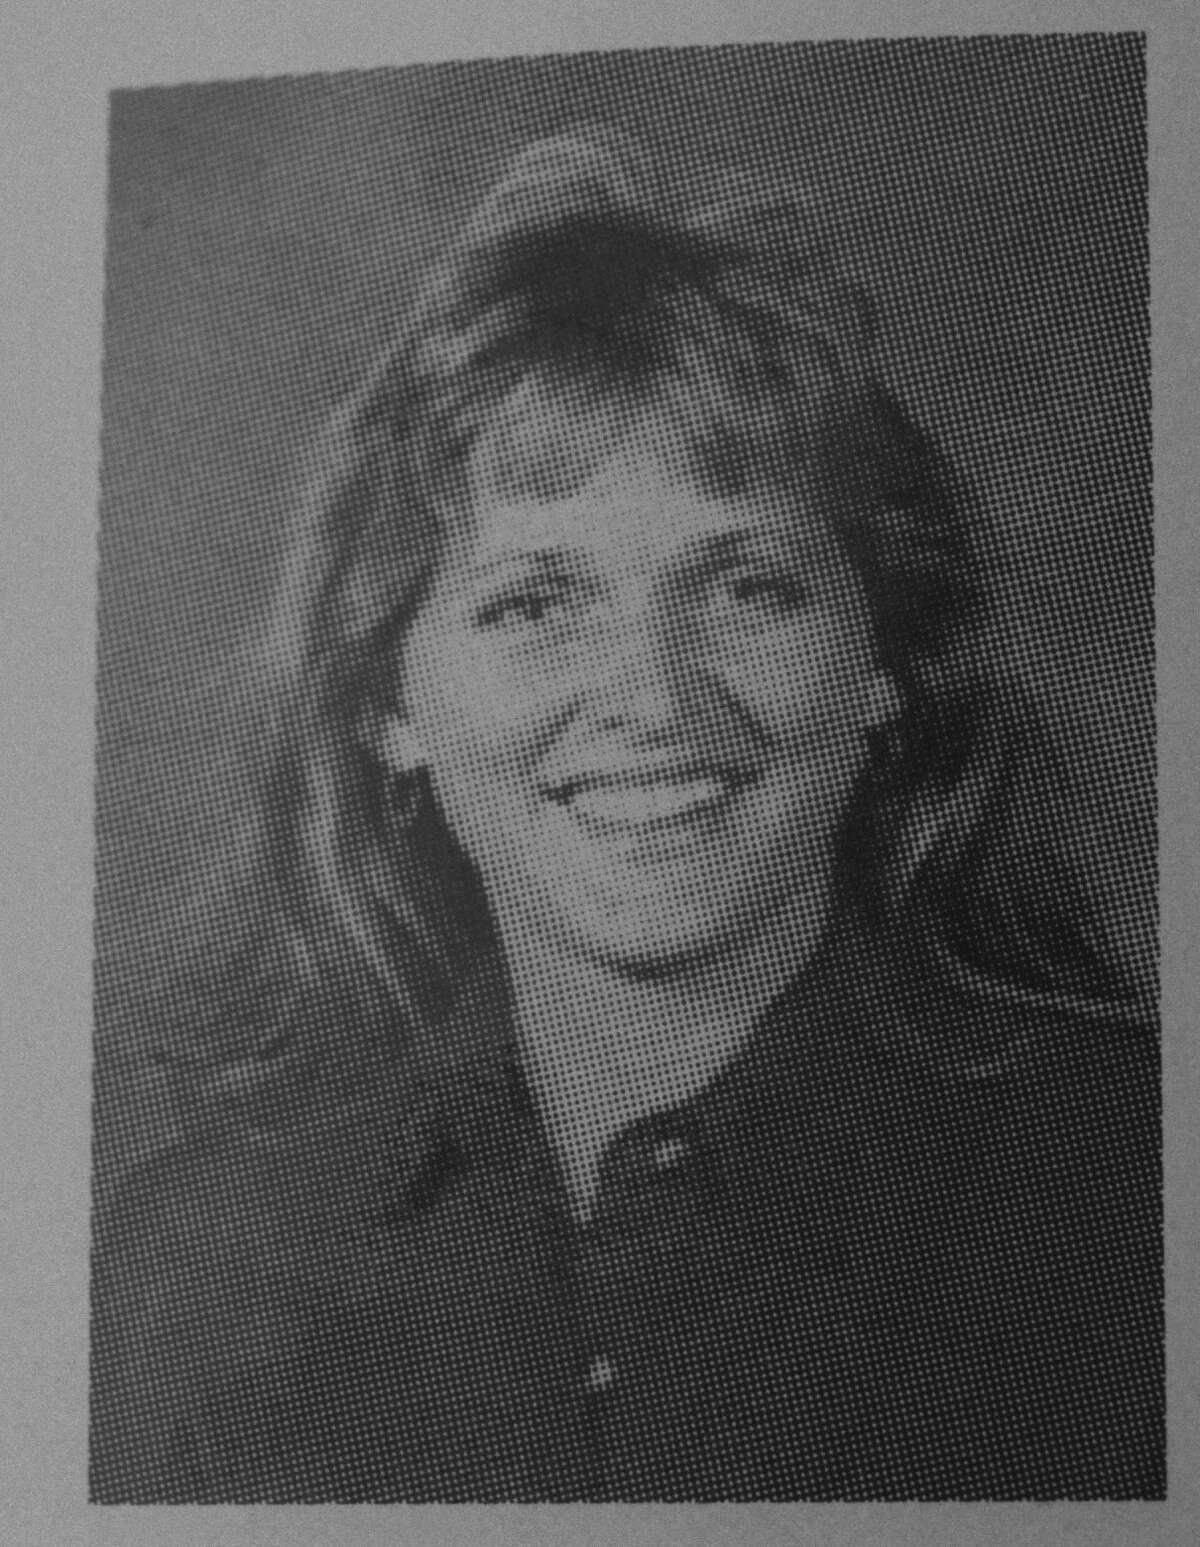 Yearbook photo of Belinda Temple, a teacher at Katy High School, who was murdered in 1999. David Temple went to trial for the murder in 2007 and was convicted and sentenced to life in prison. 